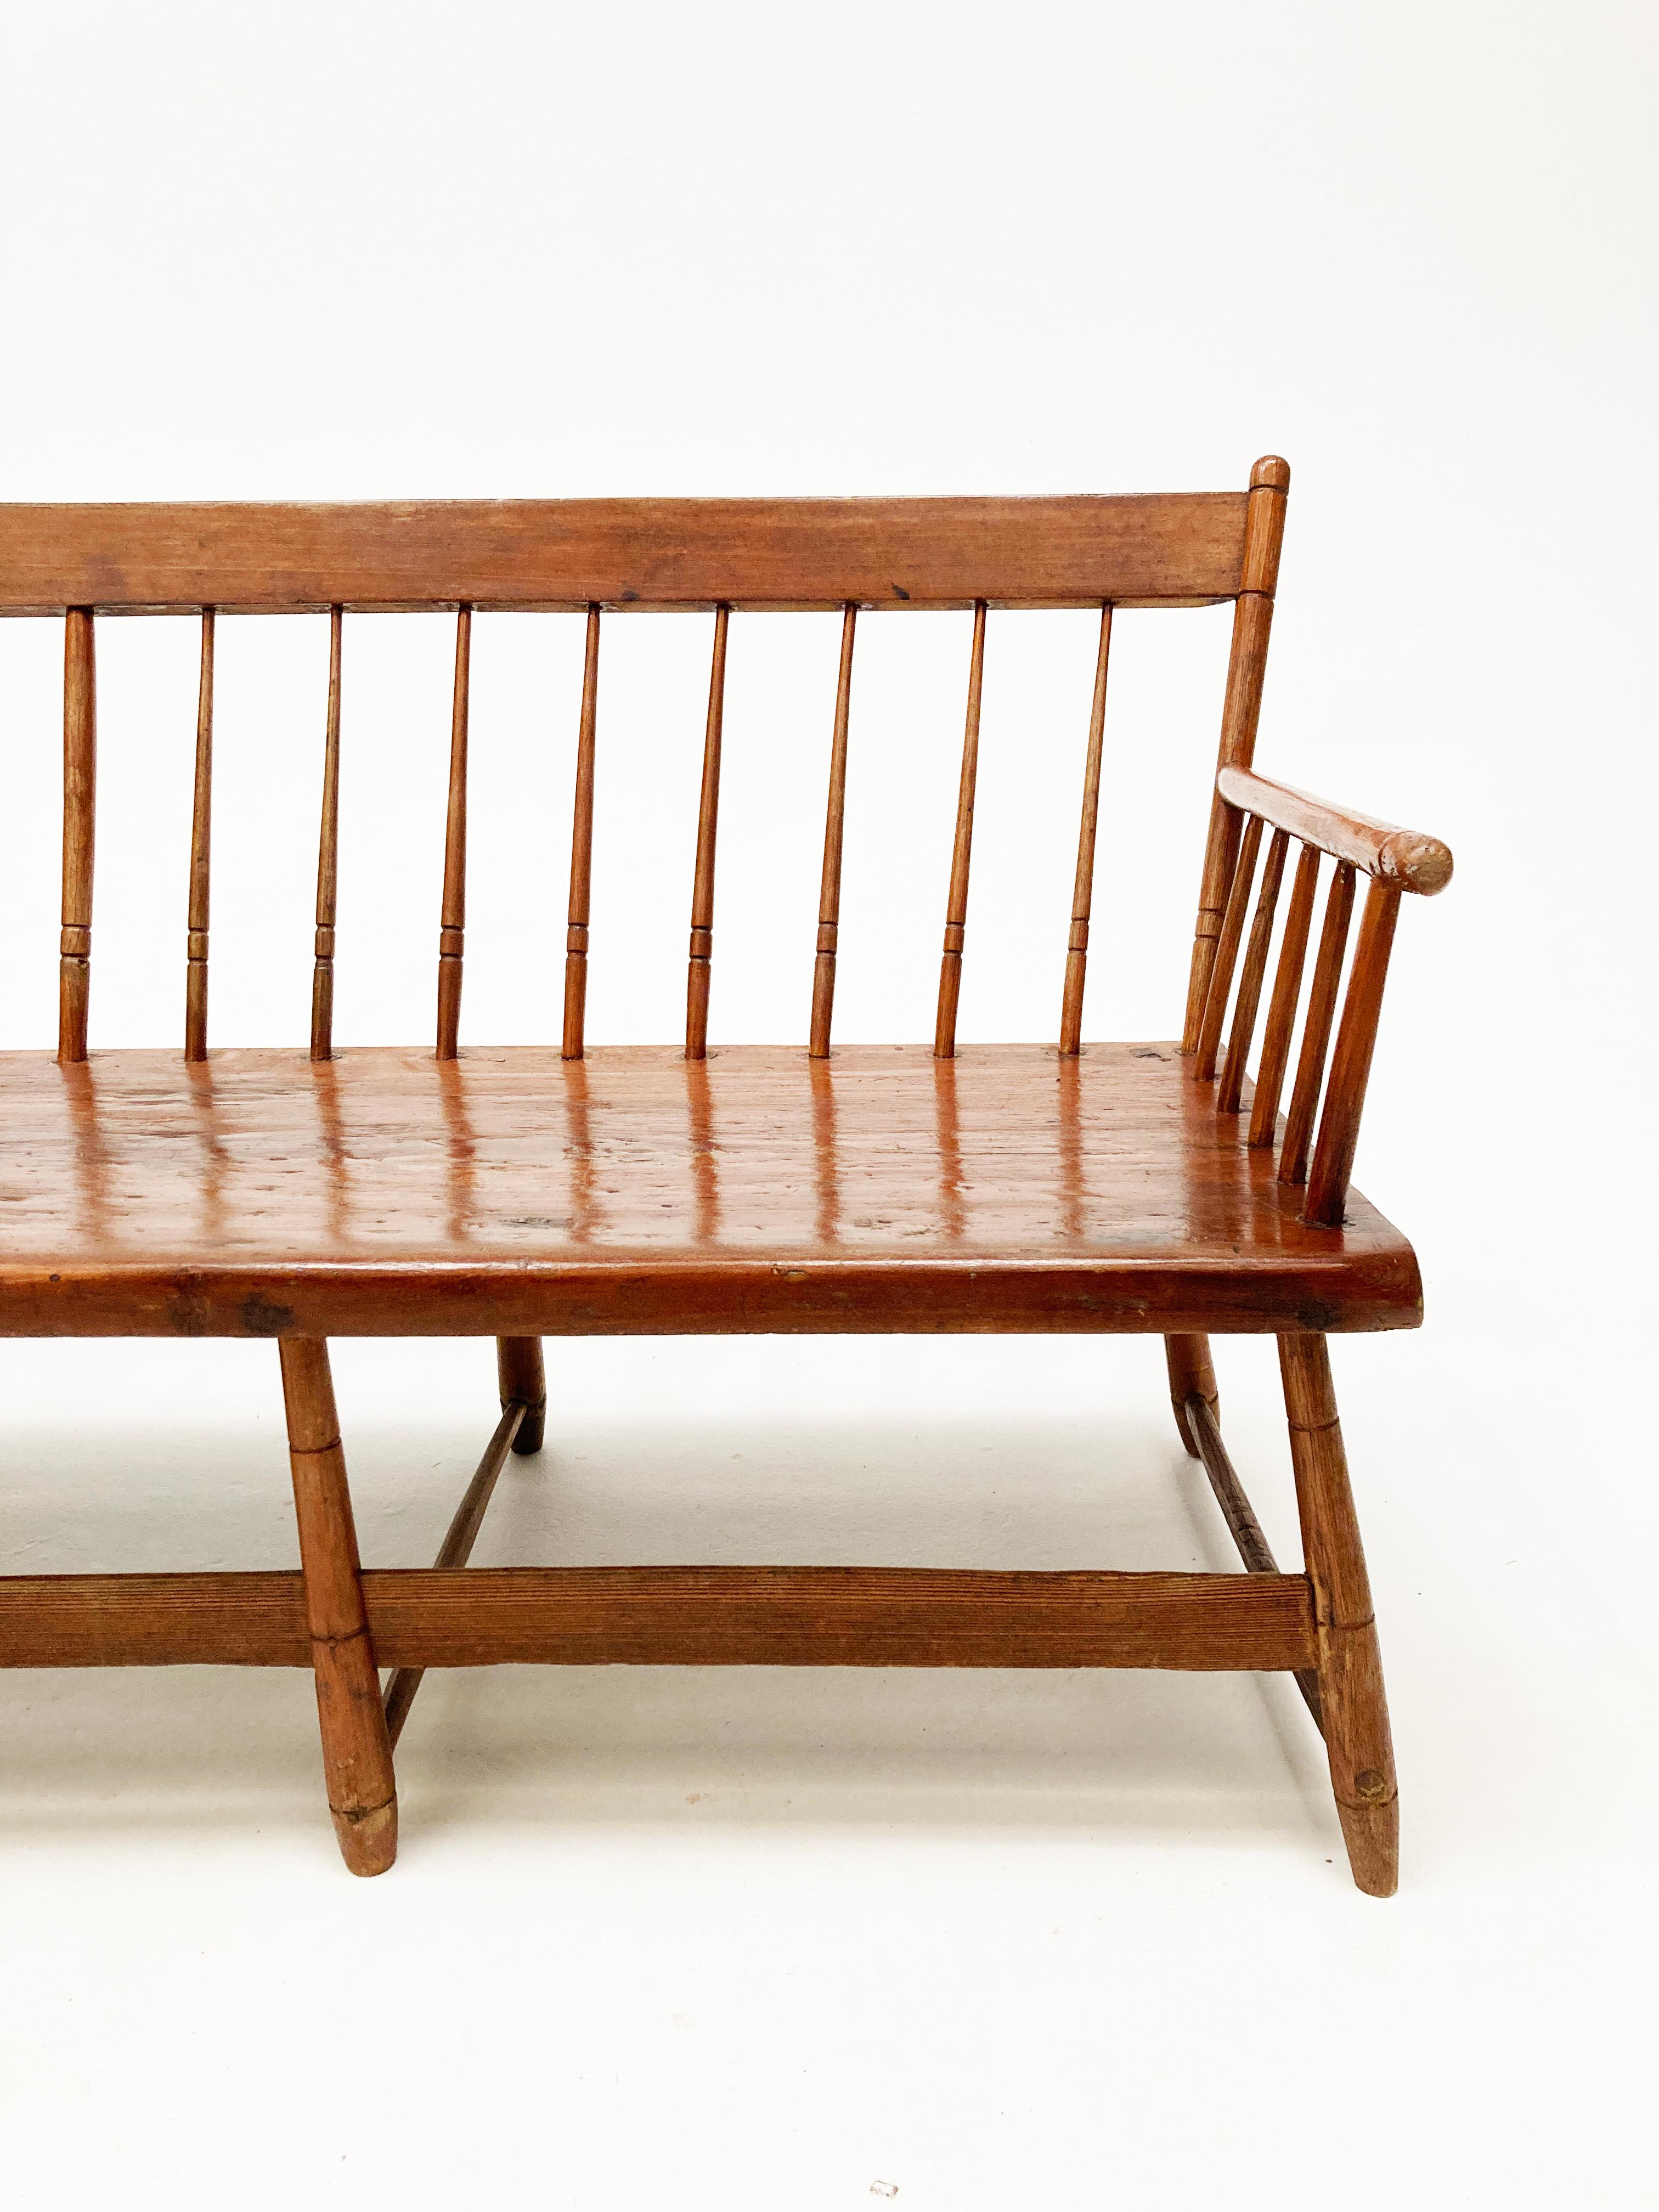 Hand-Crafted Early 19th Century Early American Pine Windsor Spindle-Back Meeting House Bench